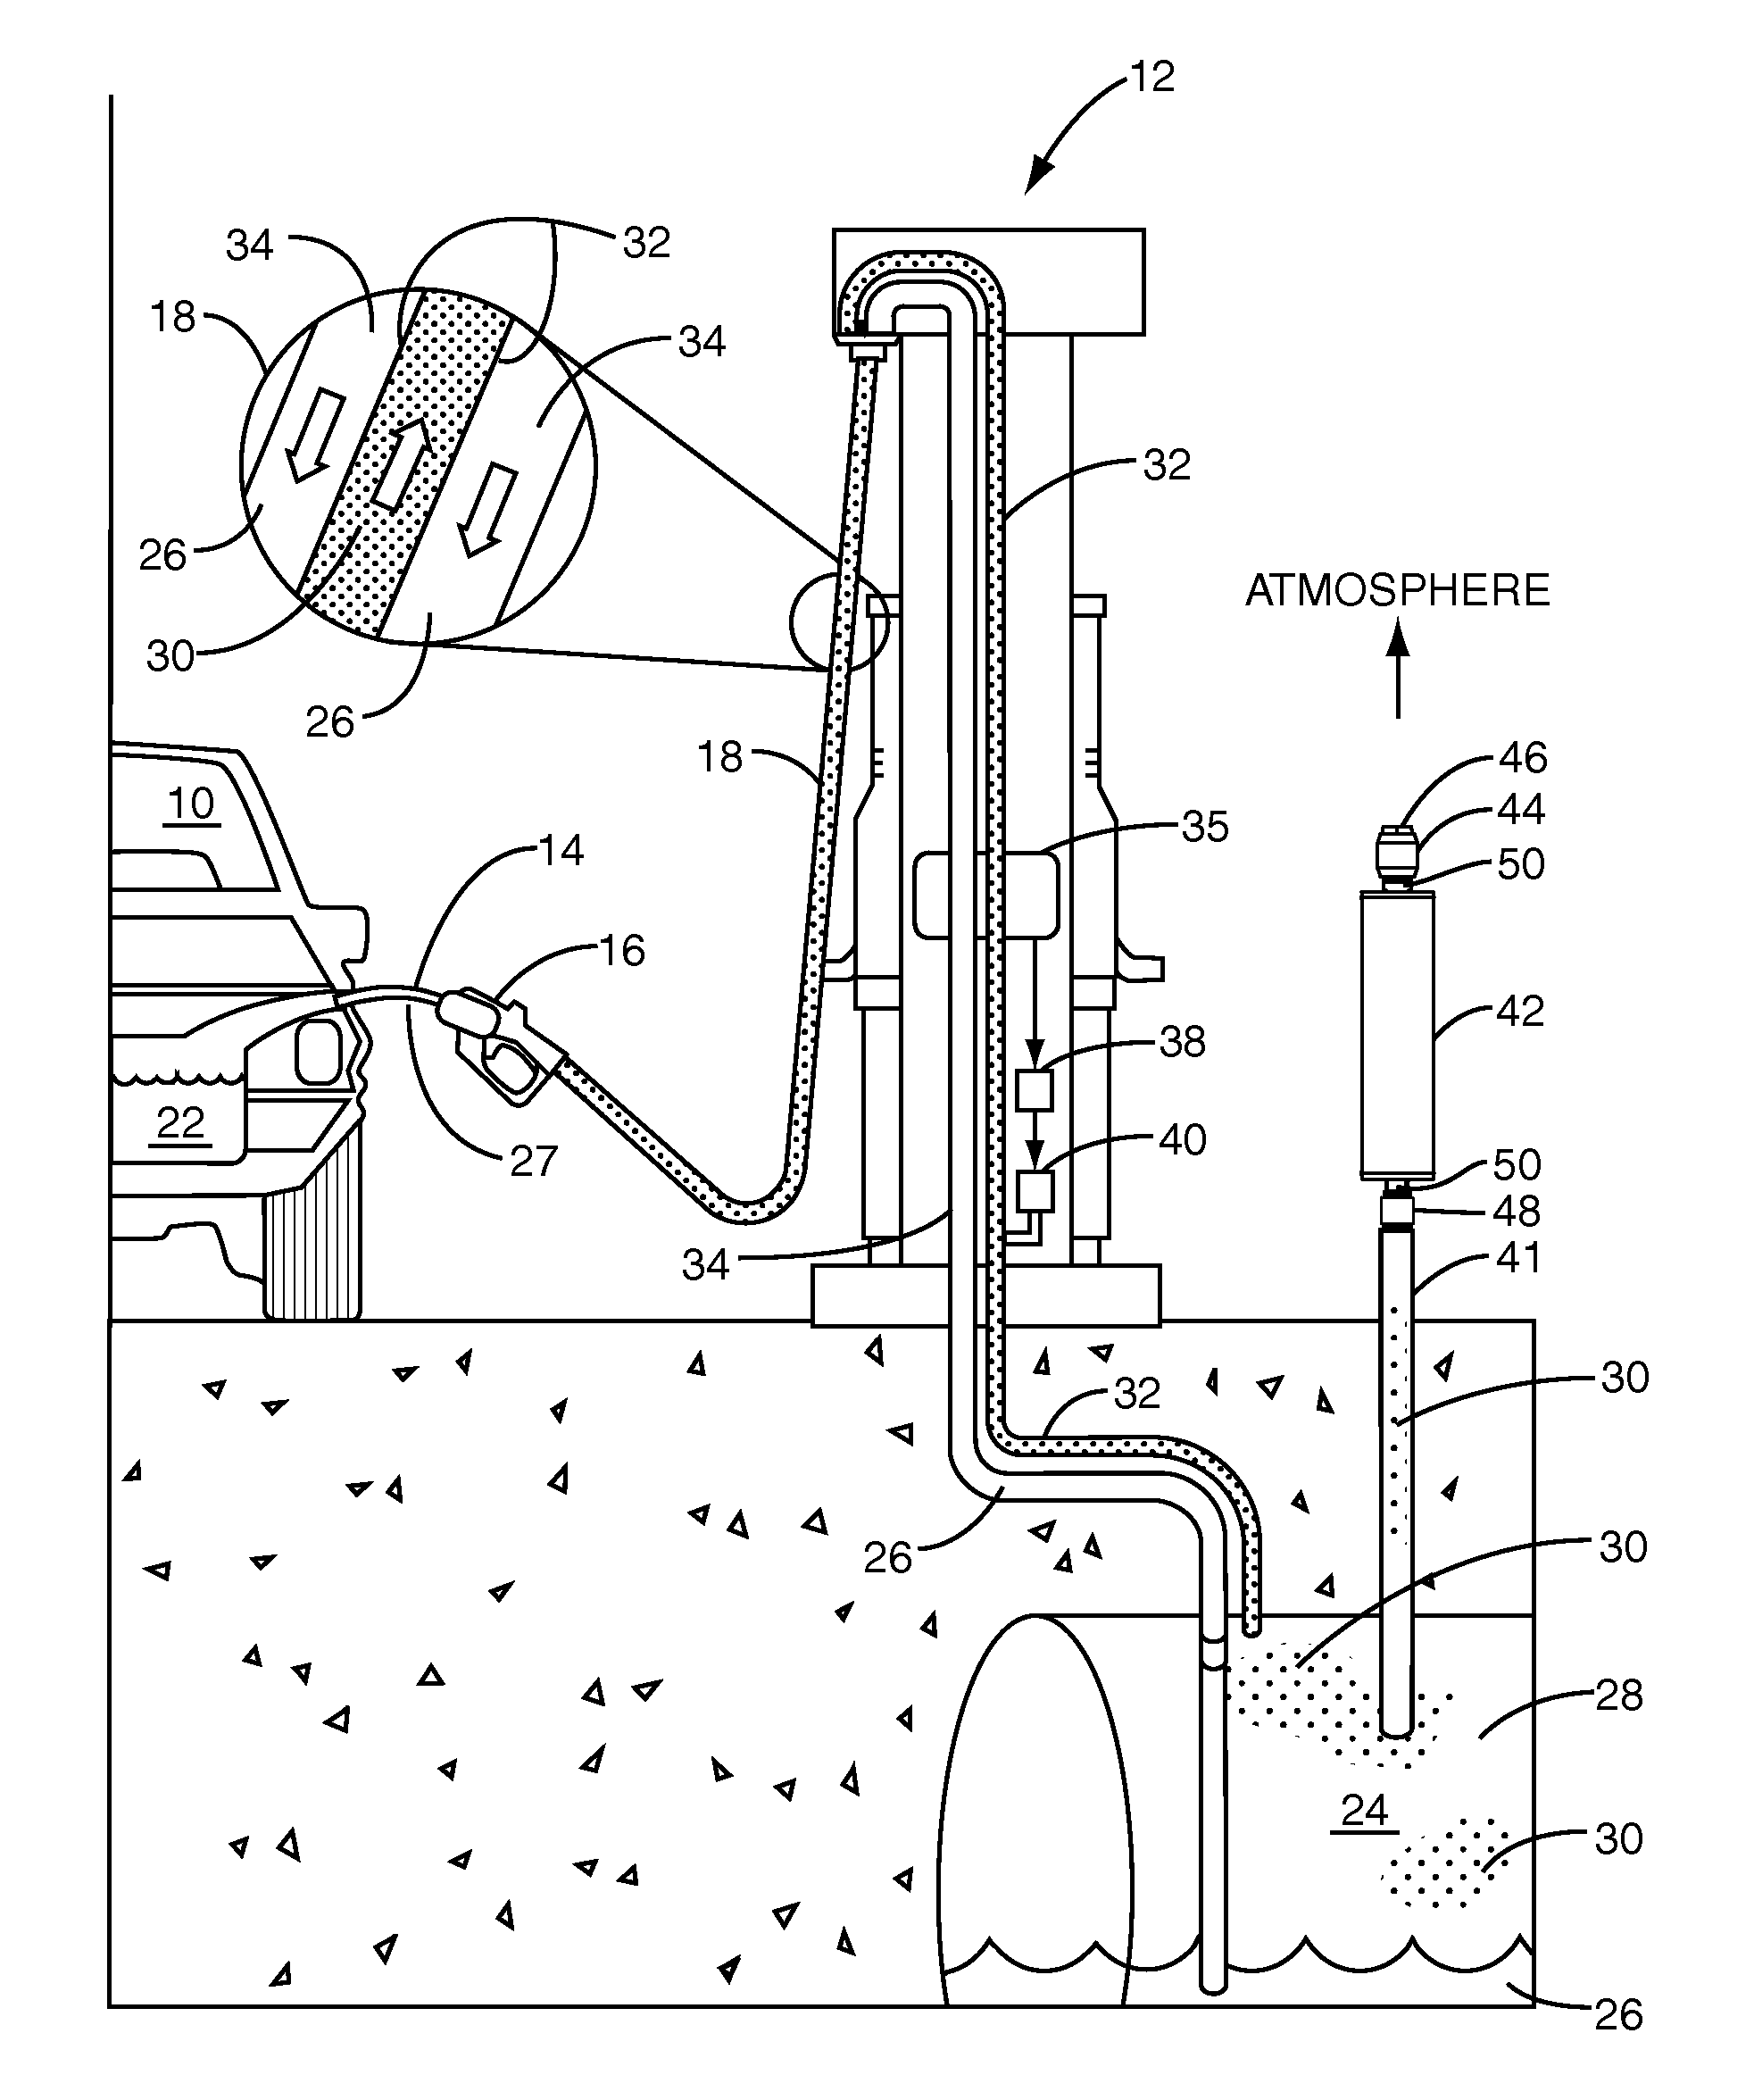 Fuel storage tank pressure management system and method employing a carbon canister